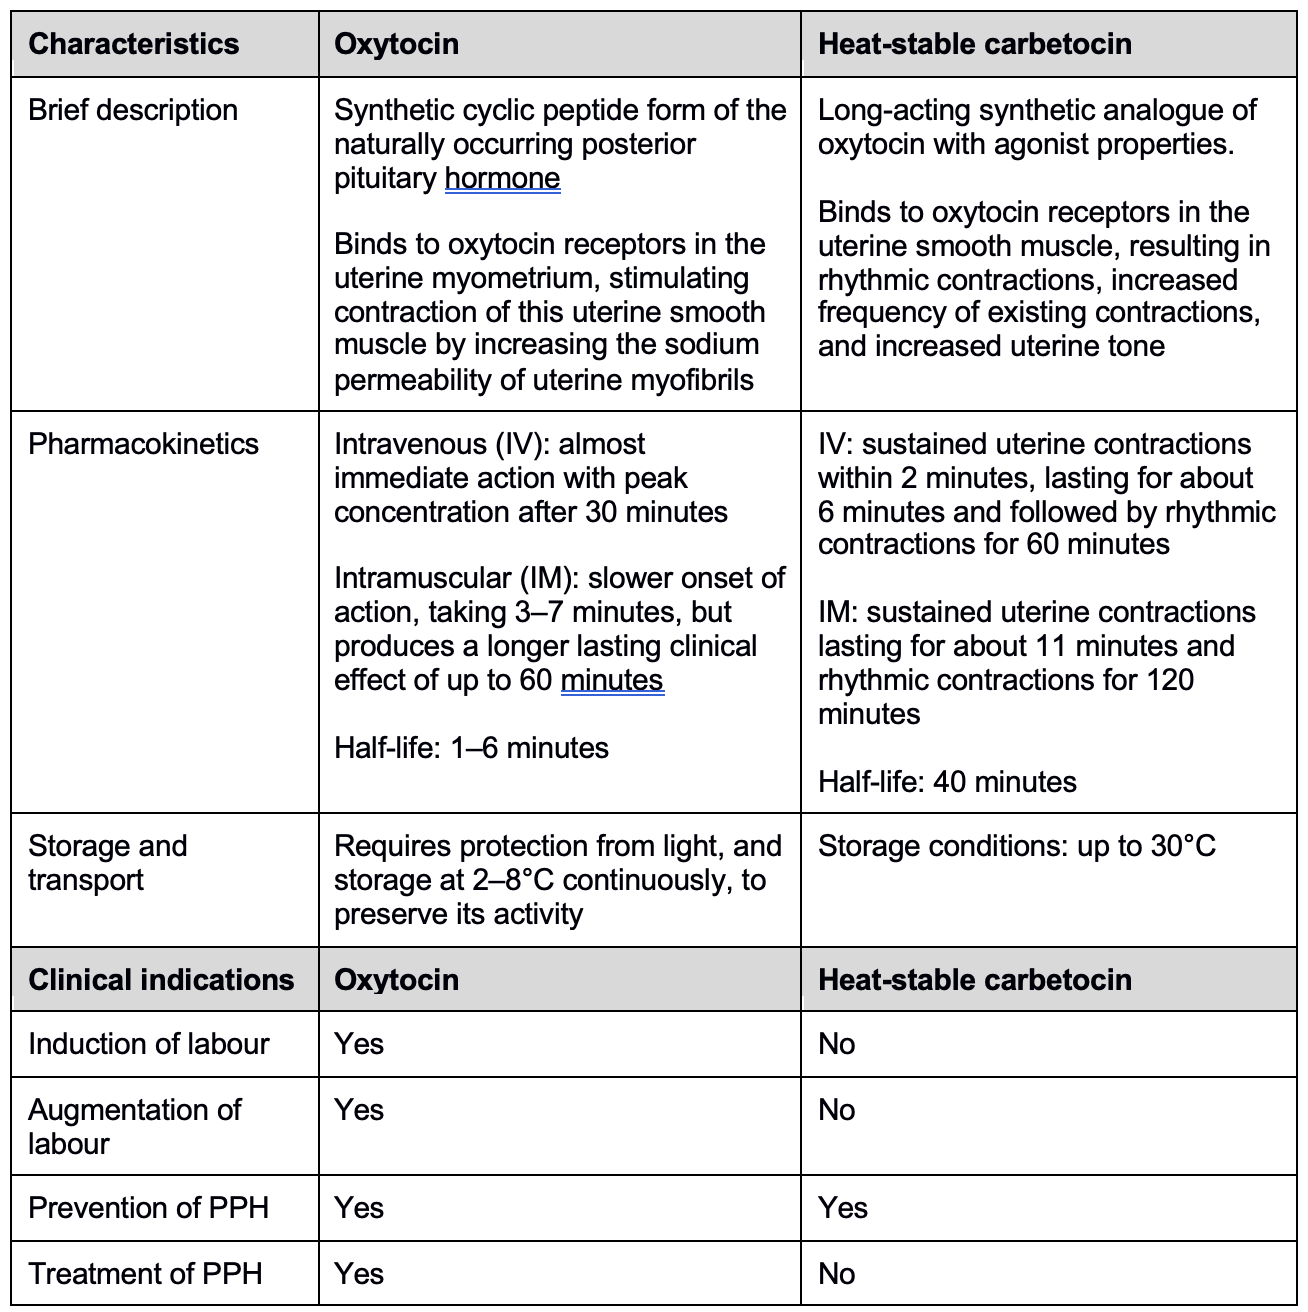 Table 1: Comparison of characteristics and clinical indications of oxytocin  and heat-stable carbetocin